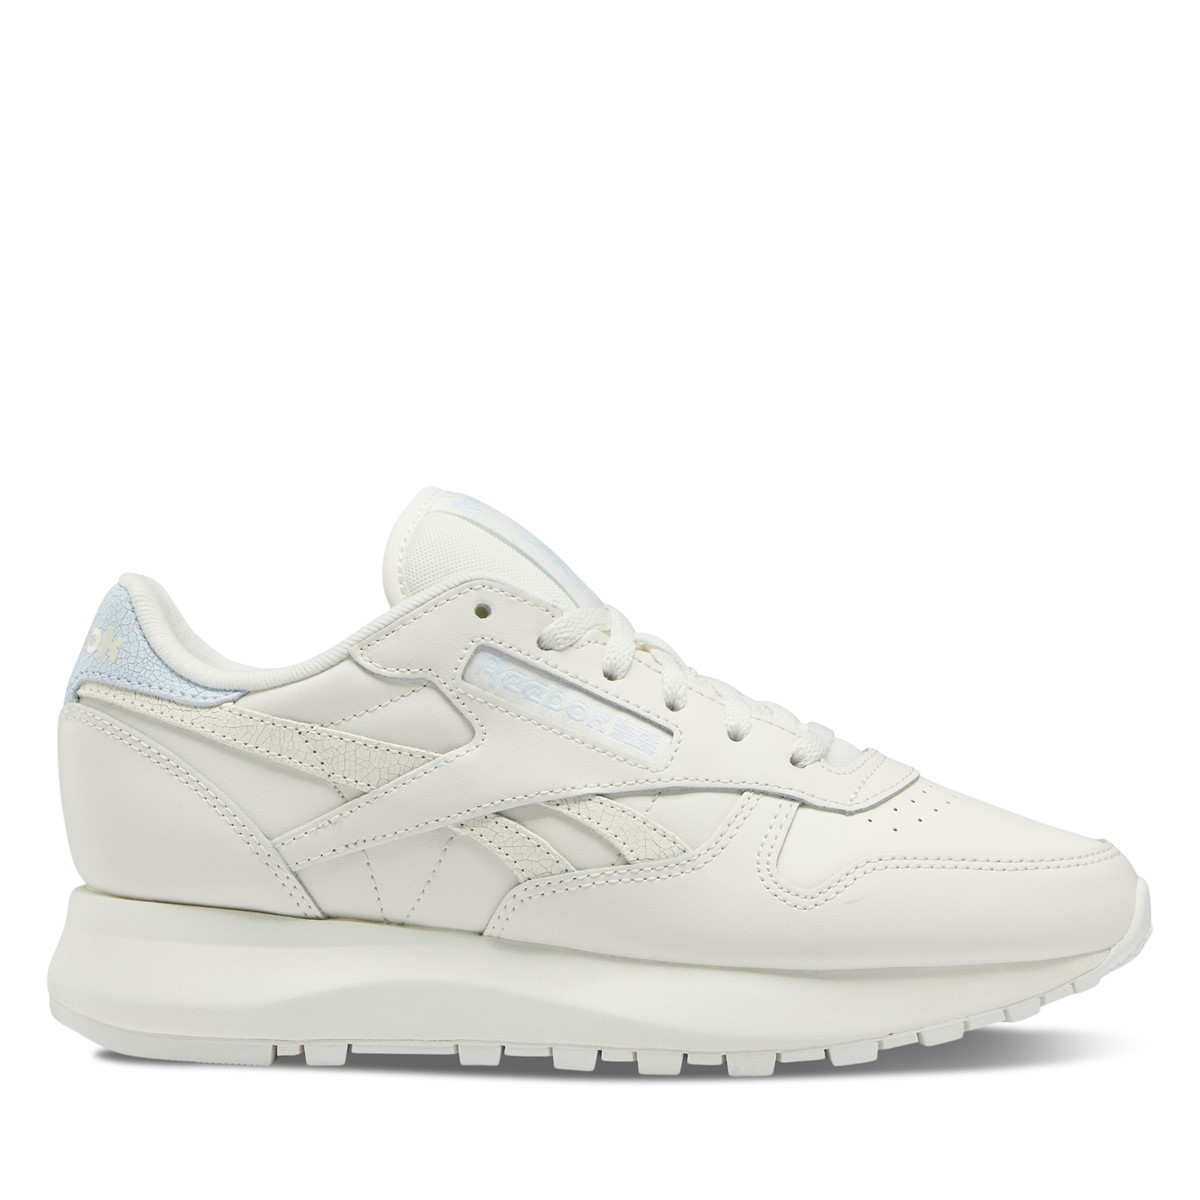 Women's Classic Leather Sneakers in White/Blue